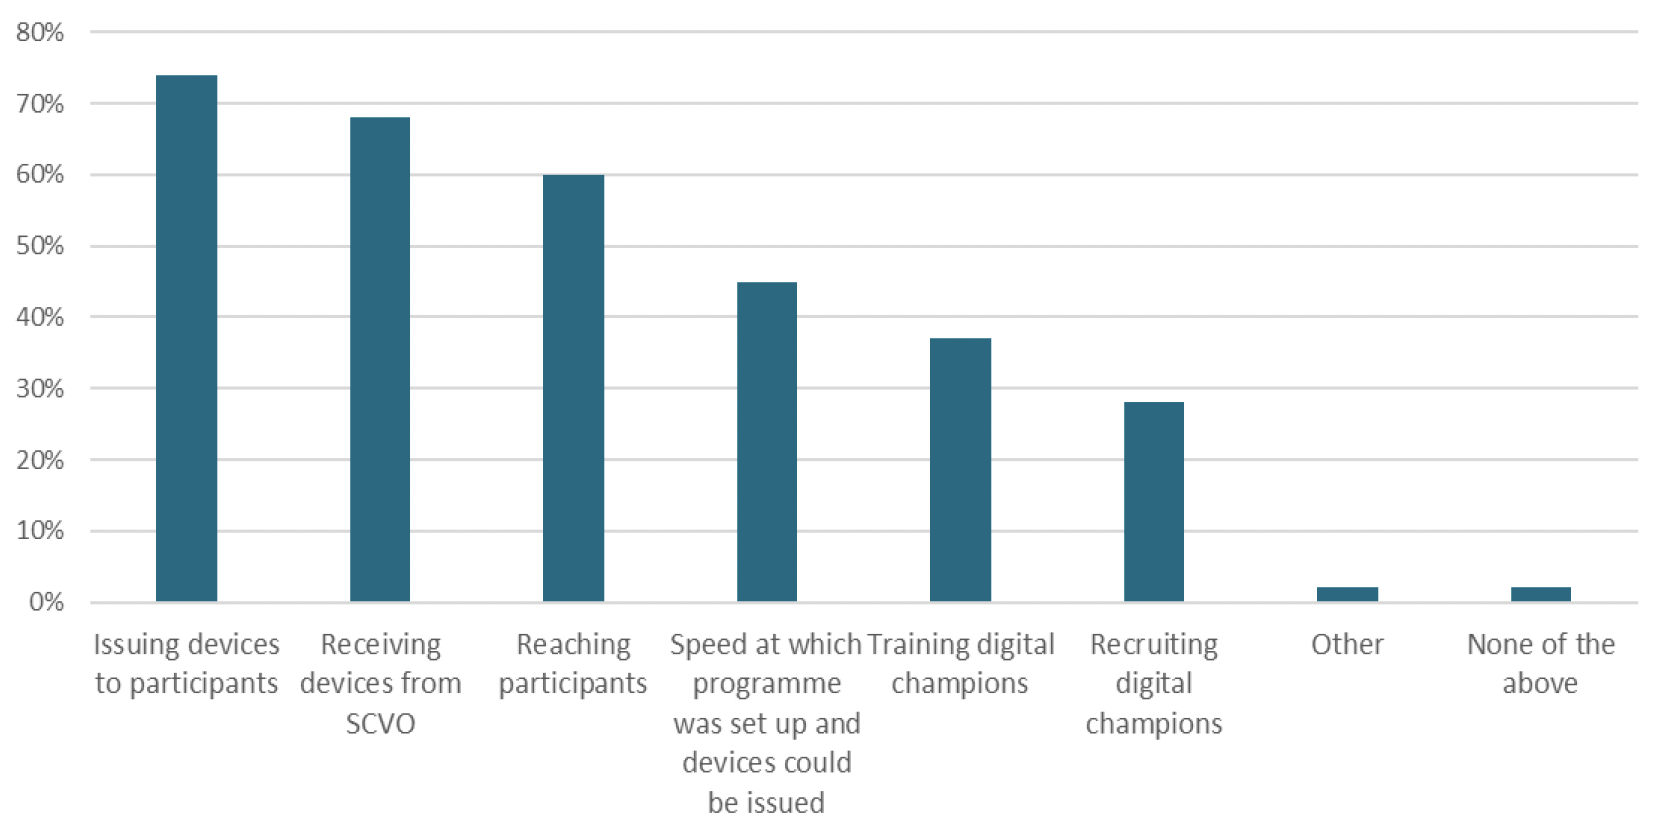 The chart shows that nearly 3 quarters of respondents said that receiving and issuing the devices had gone well. Recruiting and training digital champions was only identified as having gone well by around a third of respondents.